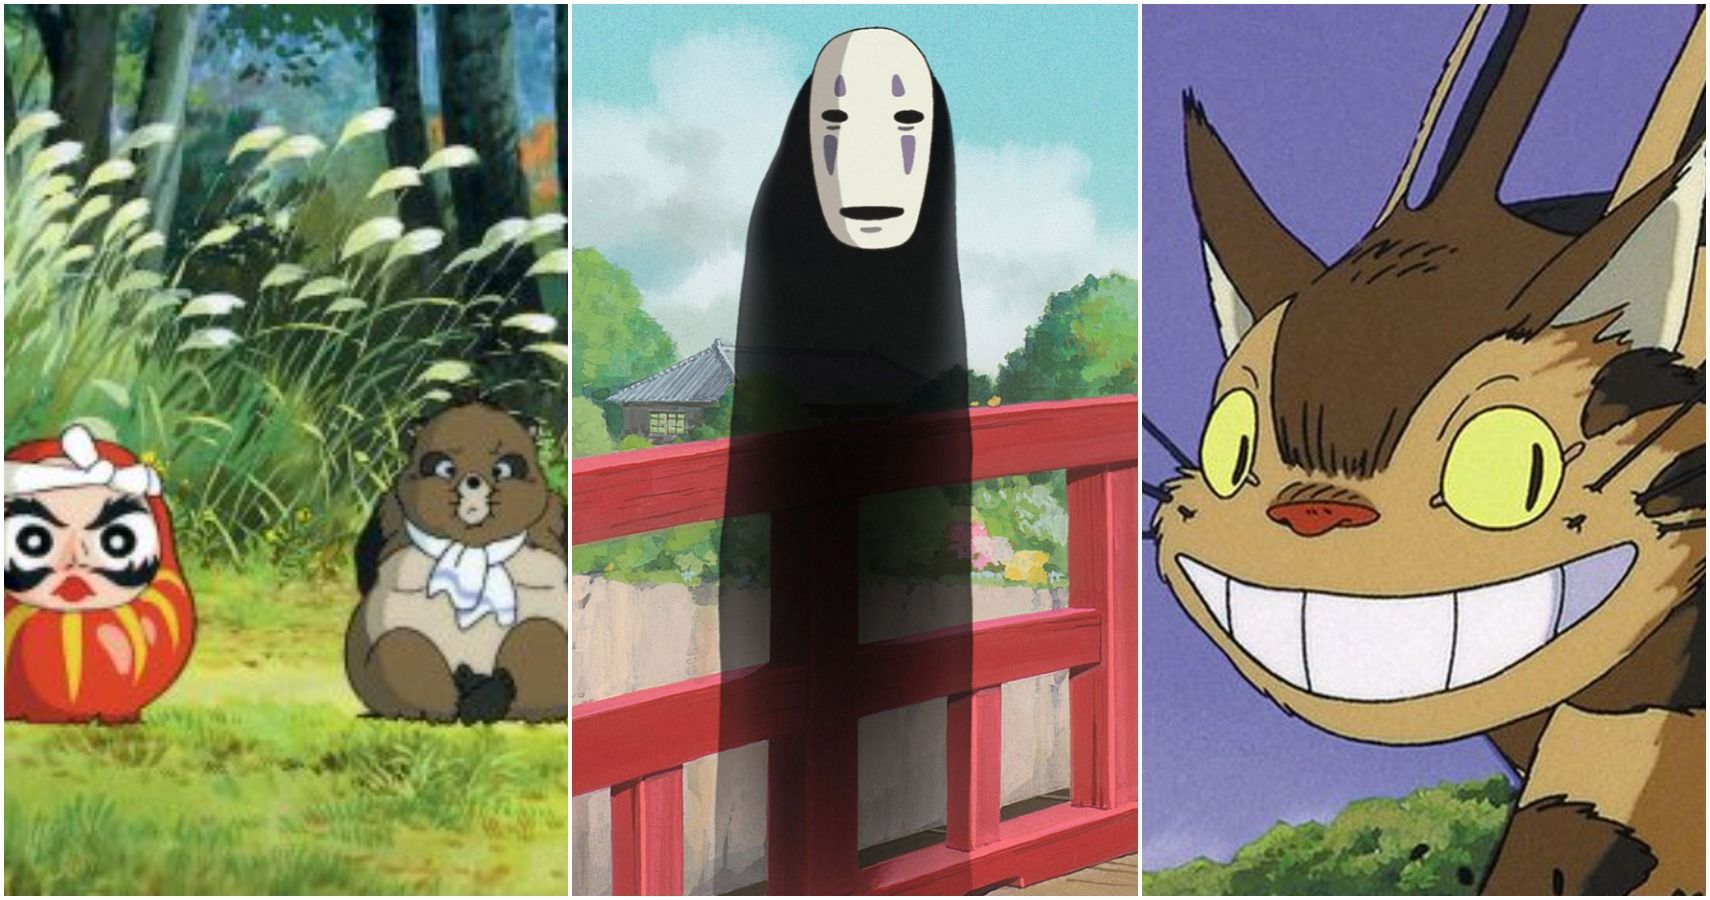 10 Studio Ghibli Creatures Inspired by Actual Folklore